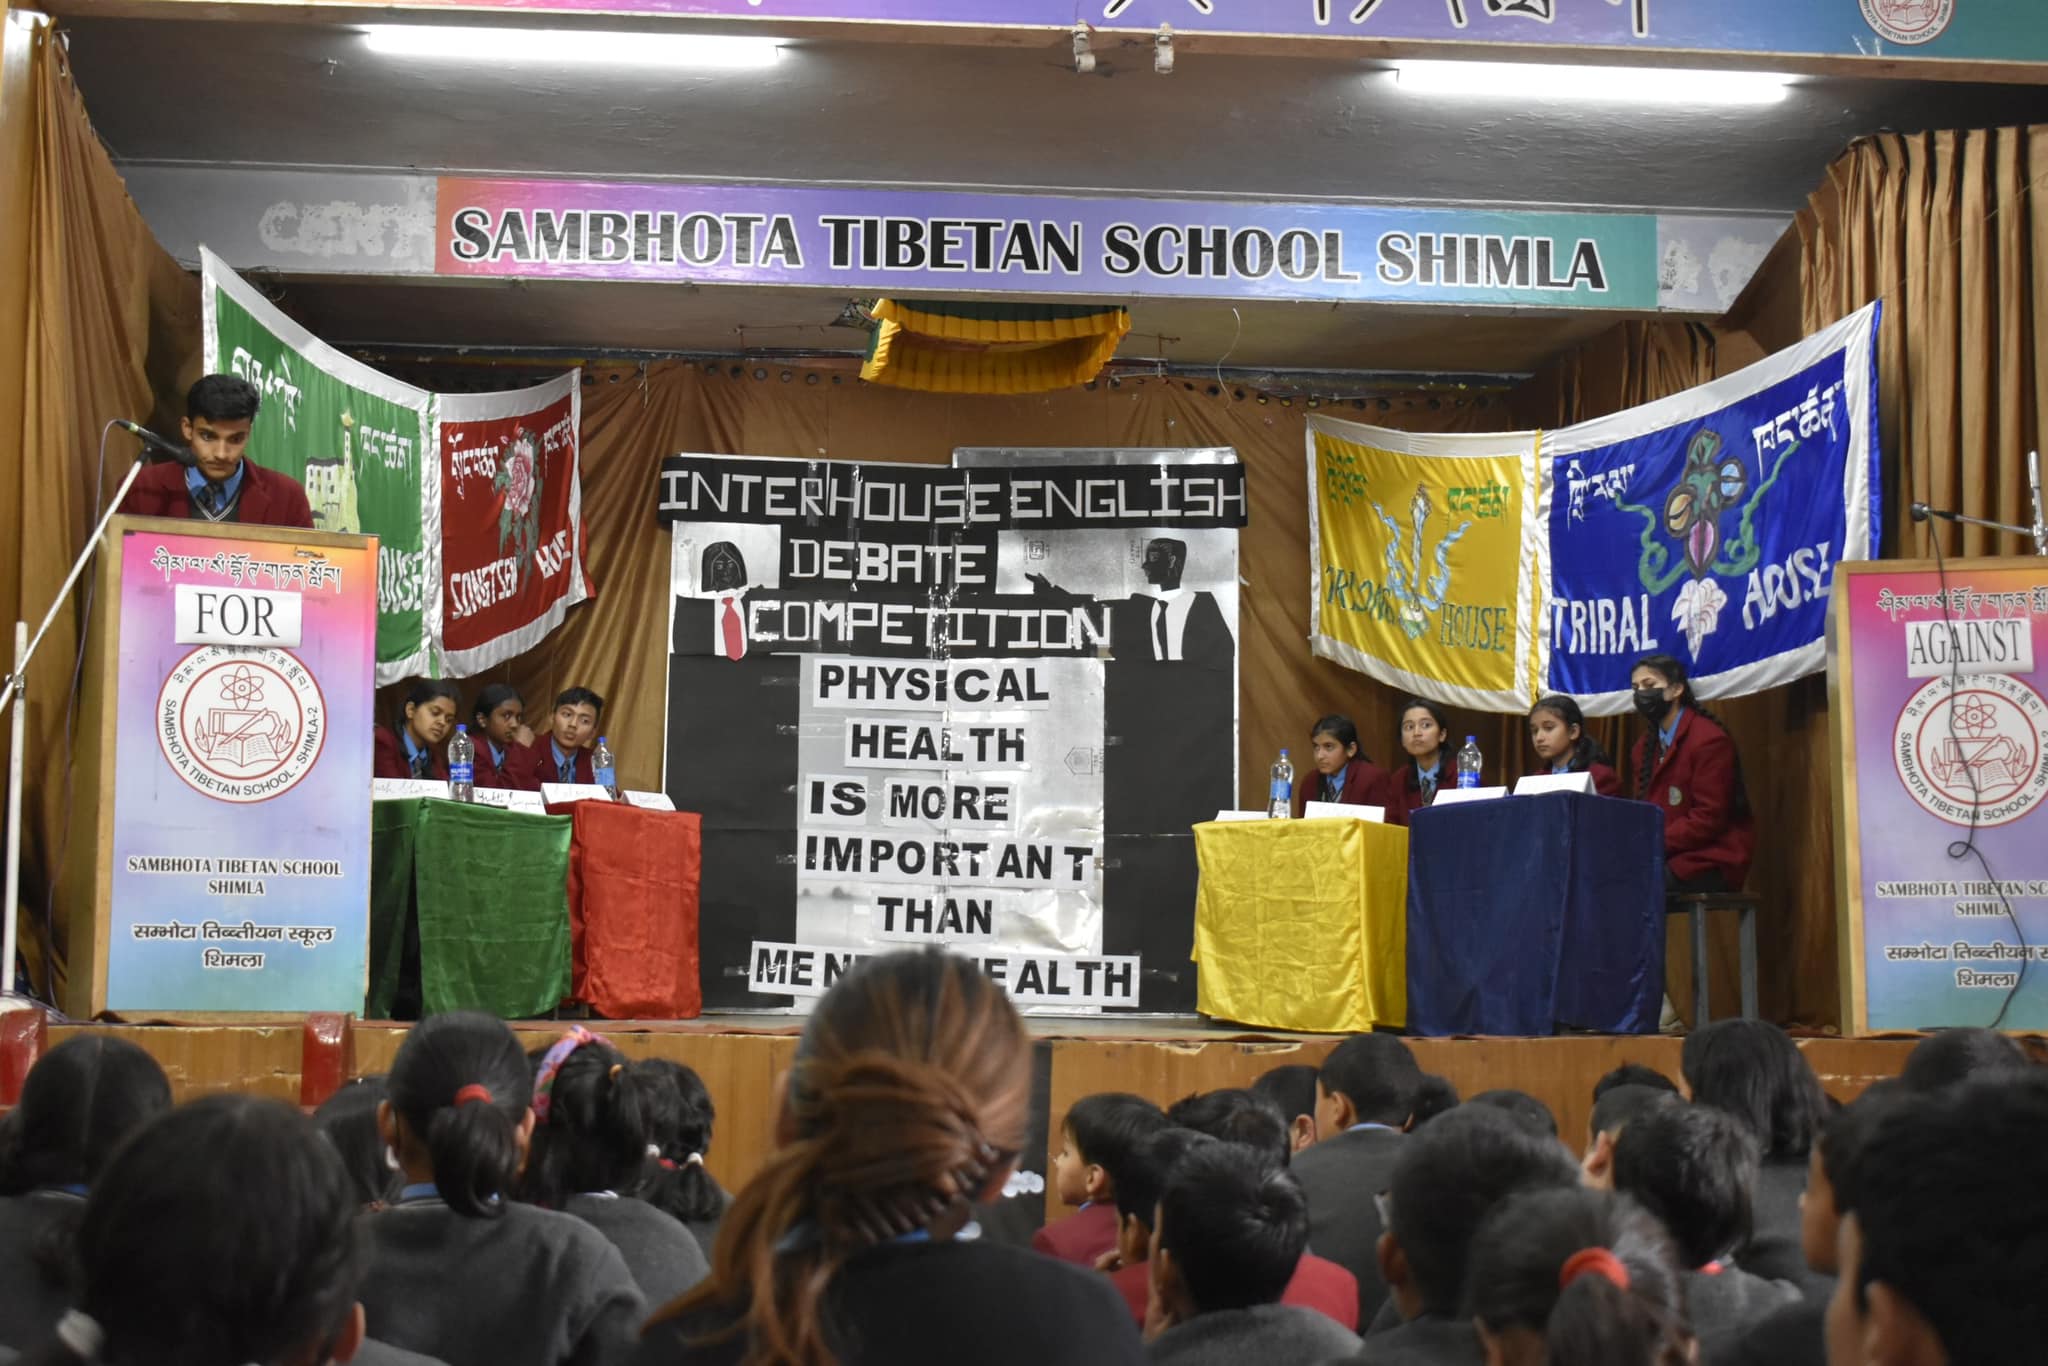 Inter-House English Debate Competition 2023